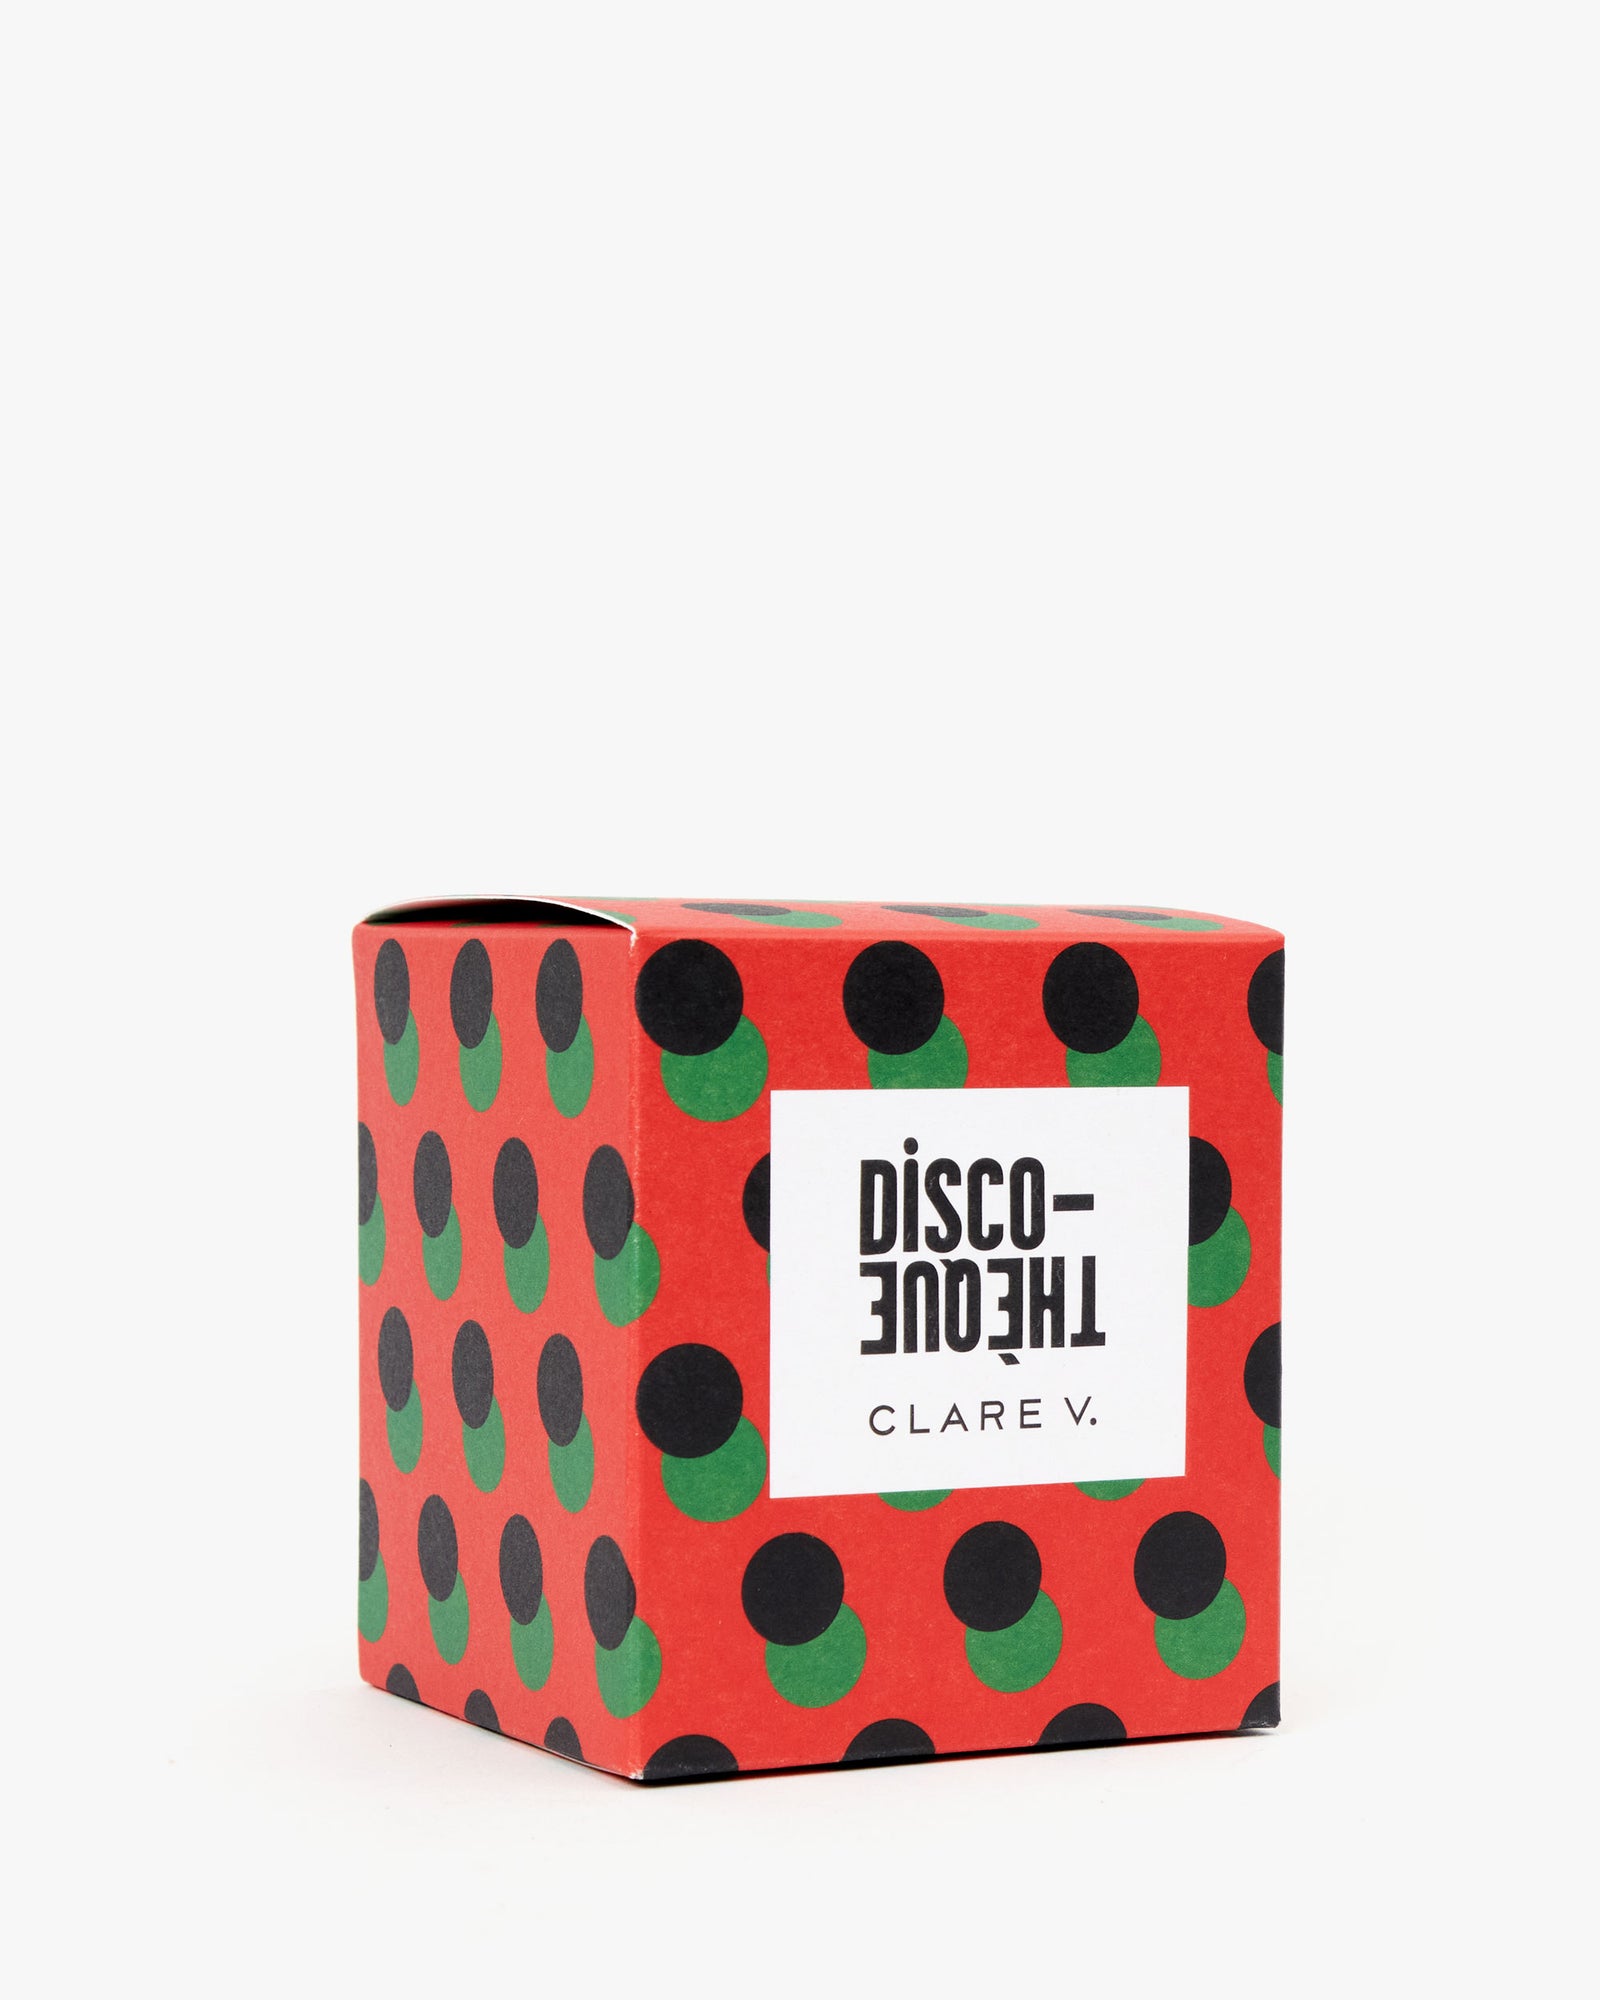 Clare V. Discotheque Candle in box